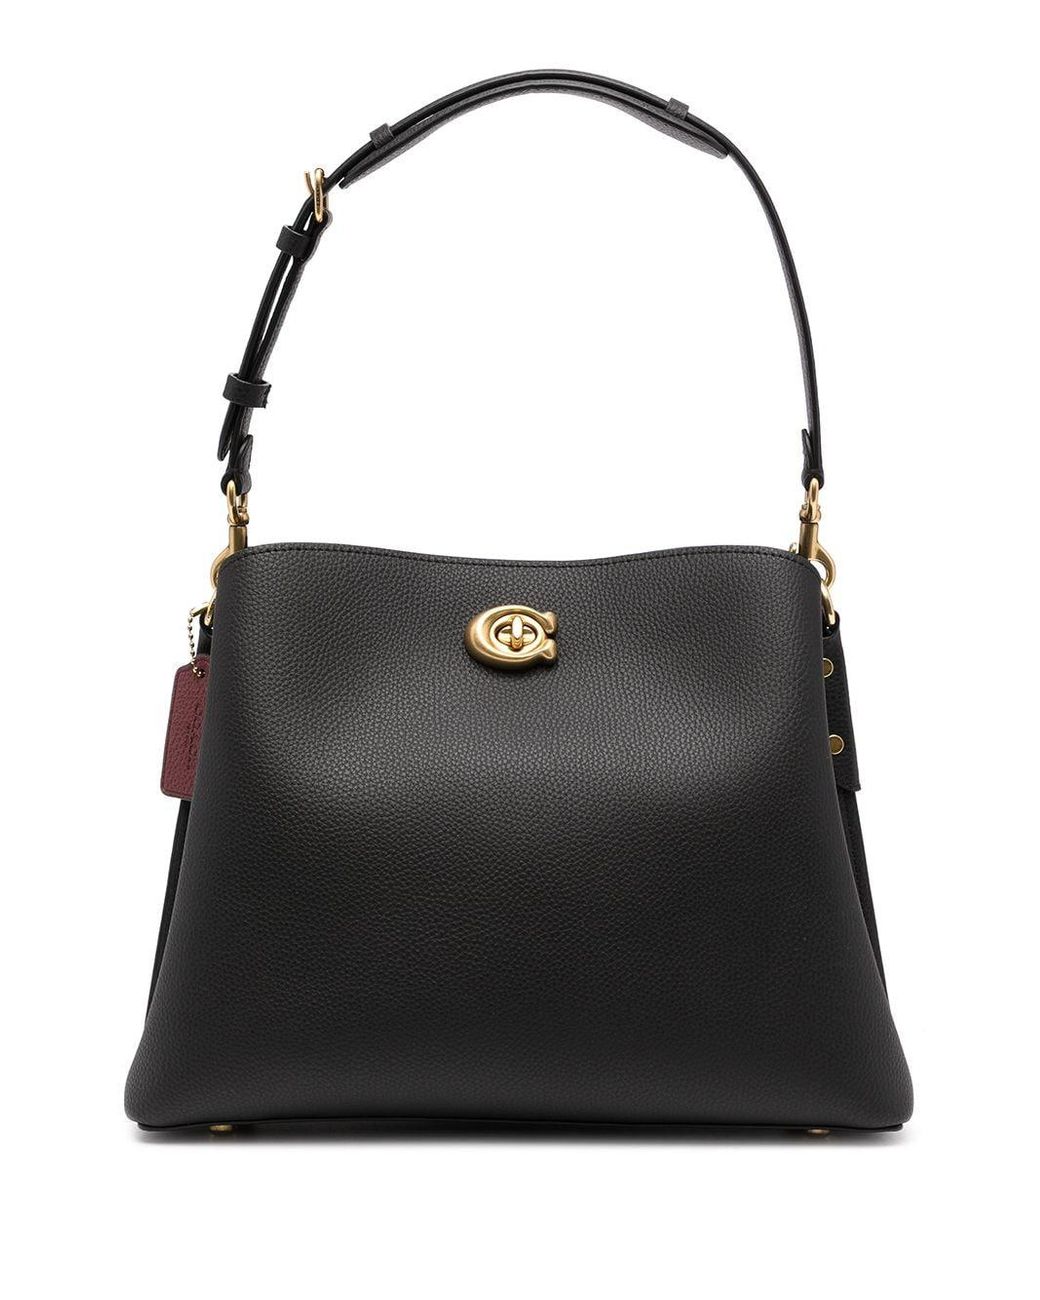 COACH Willow Leather Shoulder Bag in Black - Lyst